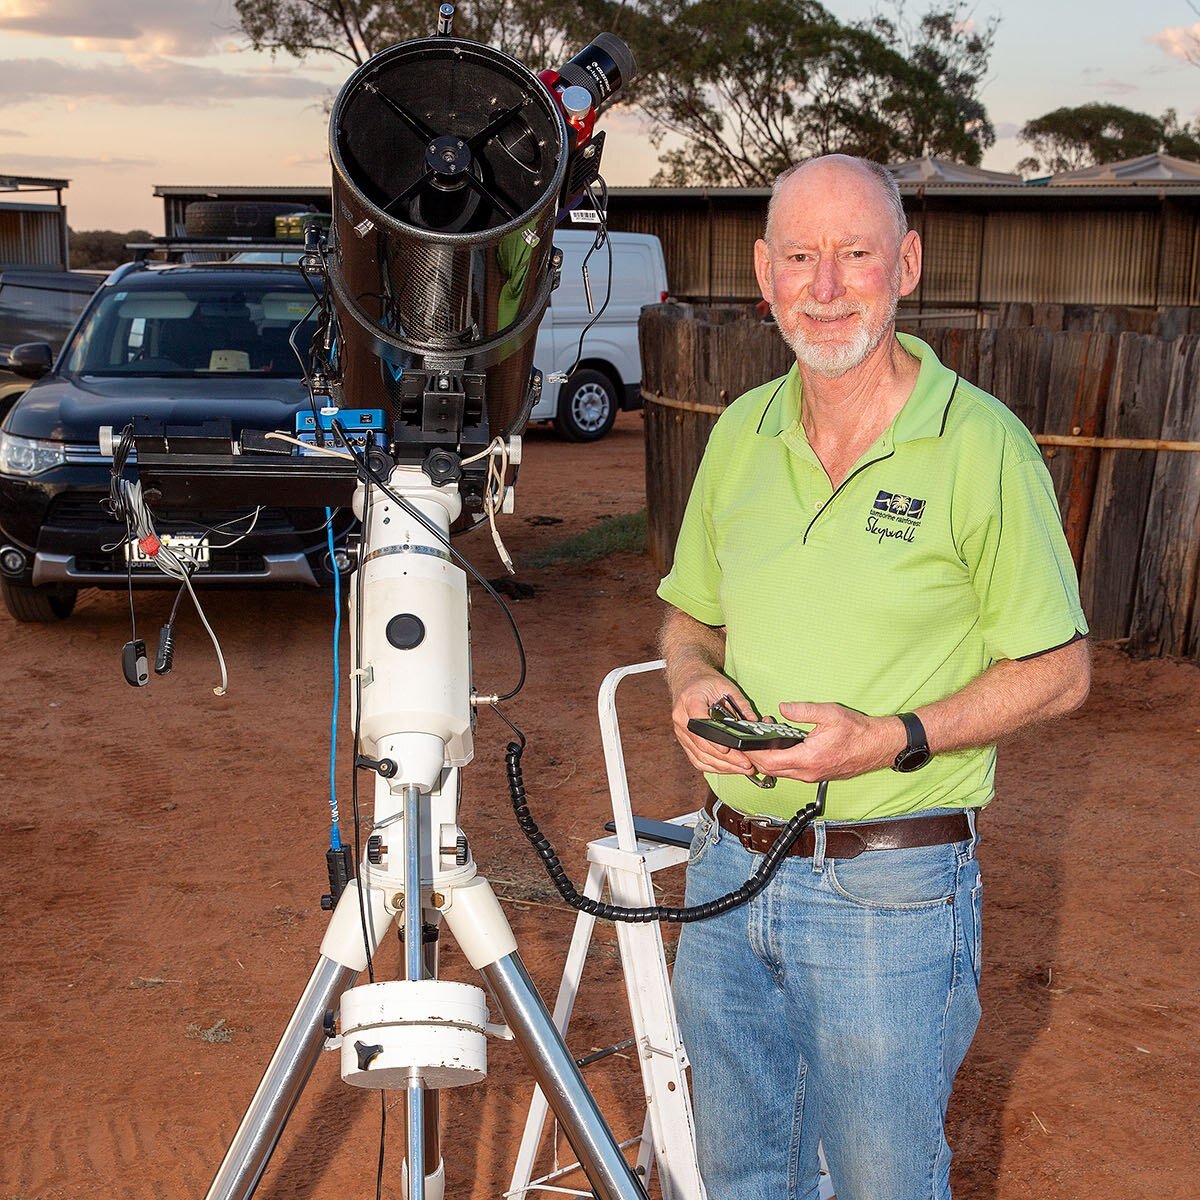 #MurchisonGeoregion and #Astrorocks this year presented the Astronomy options at the #mountmagnetraceclub and it was a real show.  We saw the rings of Saturn, and those who attended haven't stopped talking about the evening.  Thanks to #Startrackseve